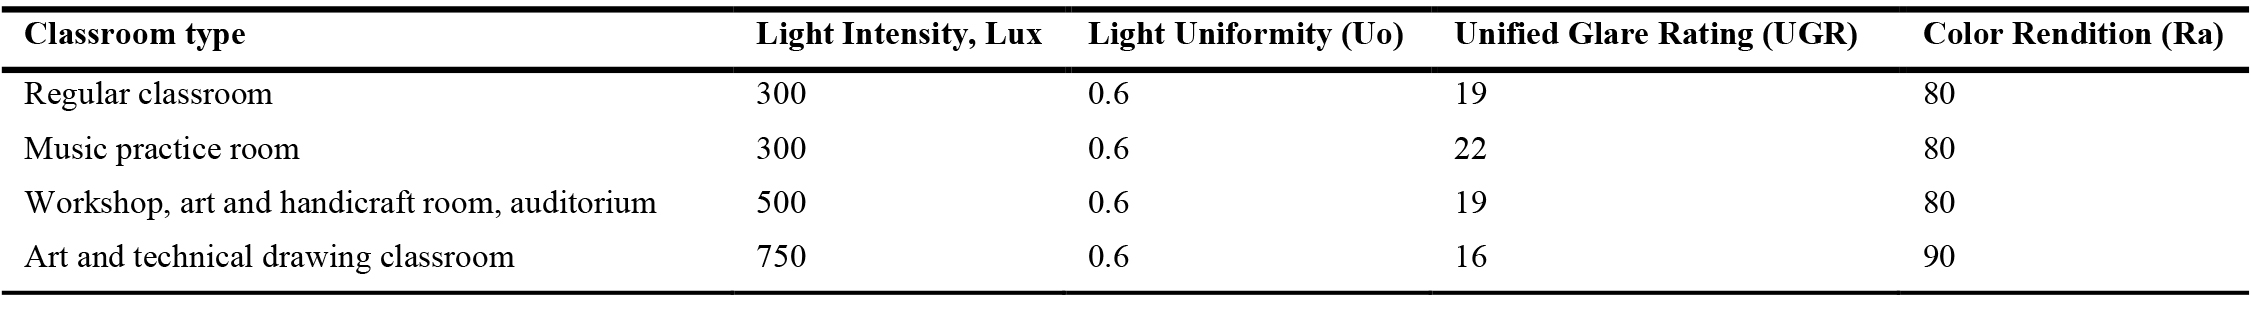 Summary of the lighting requirements for different classrooms [25,26].